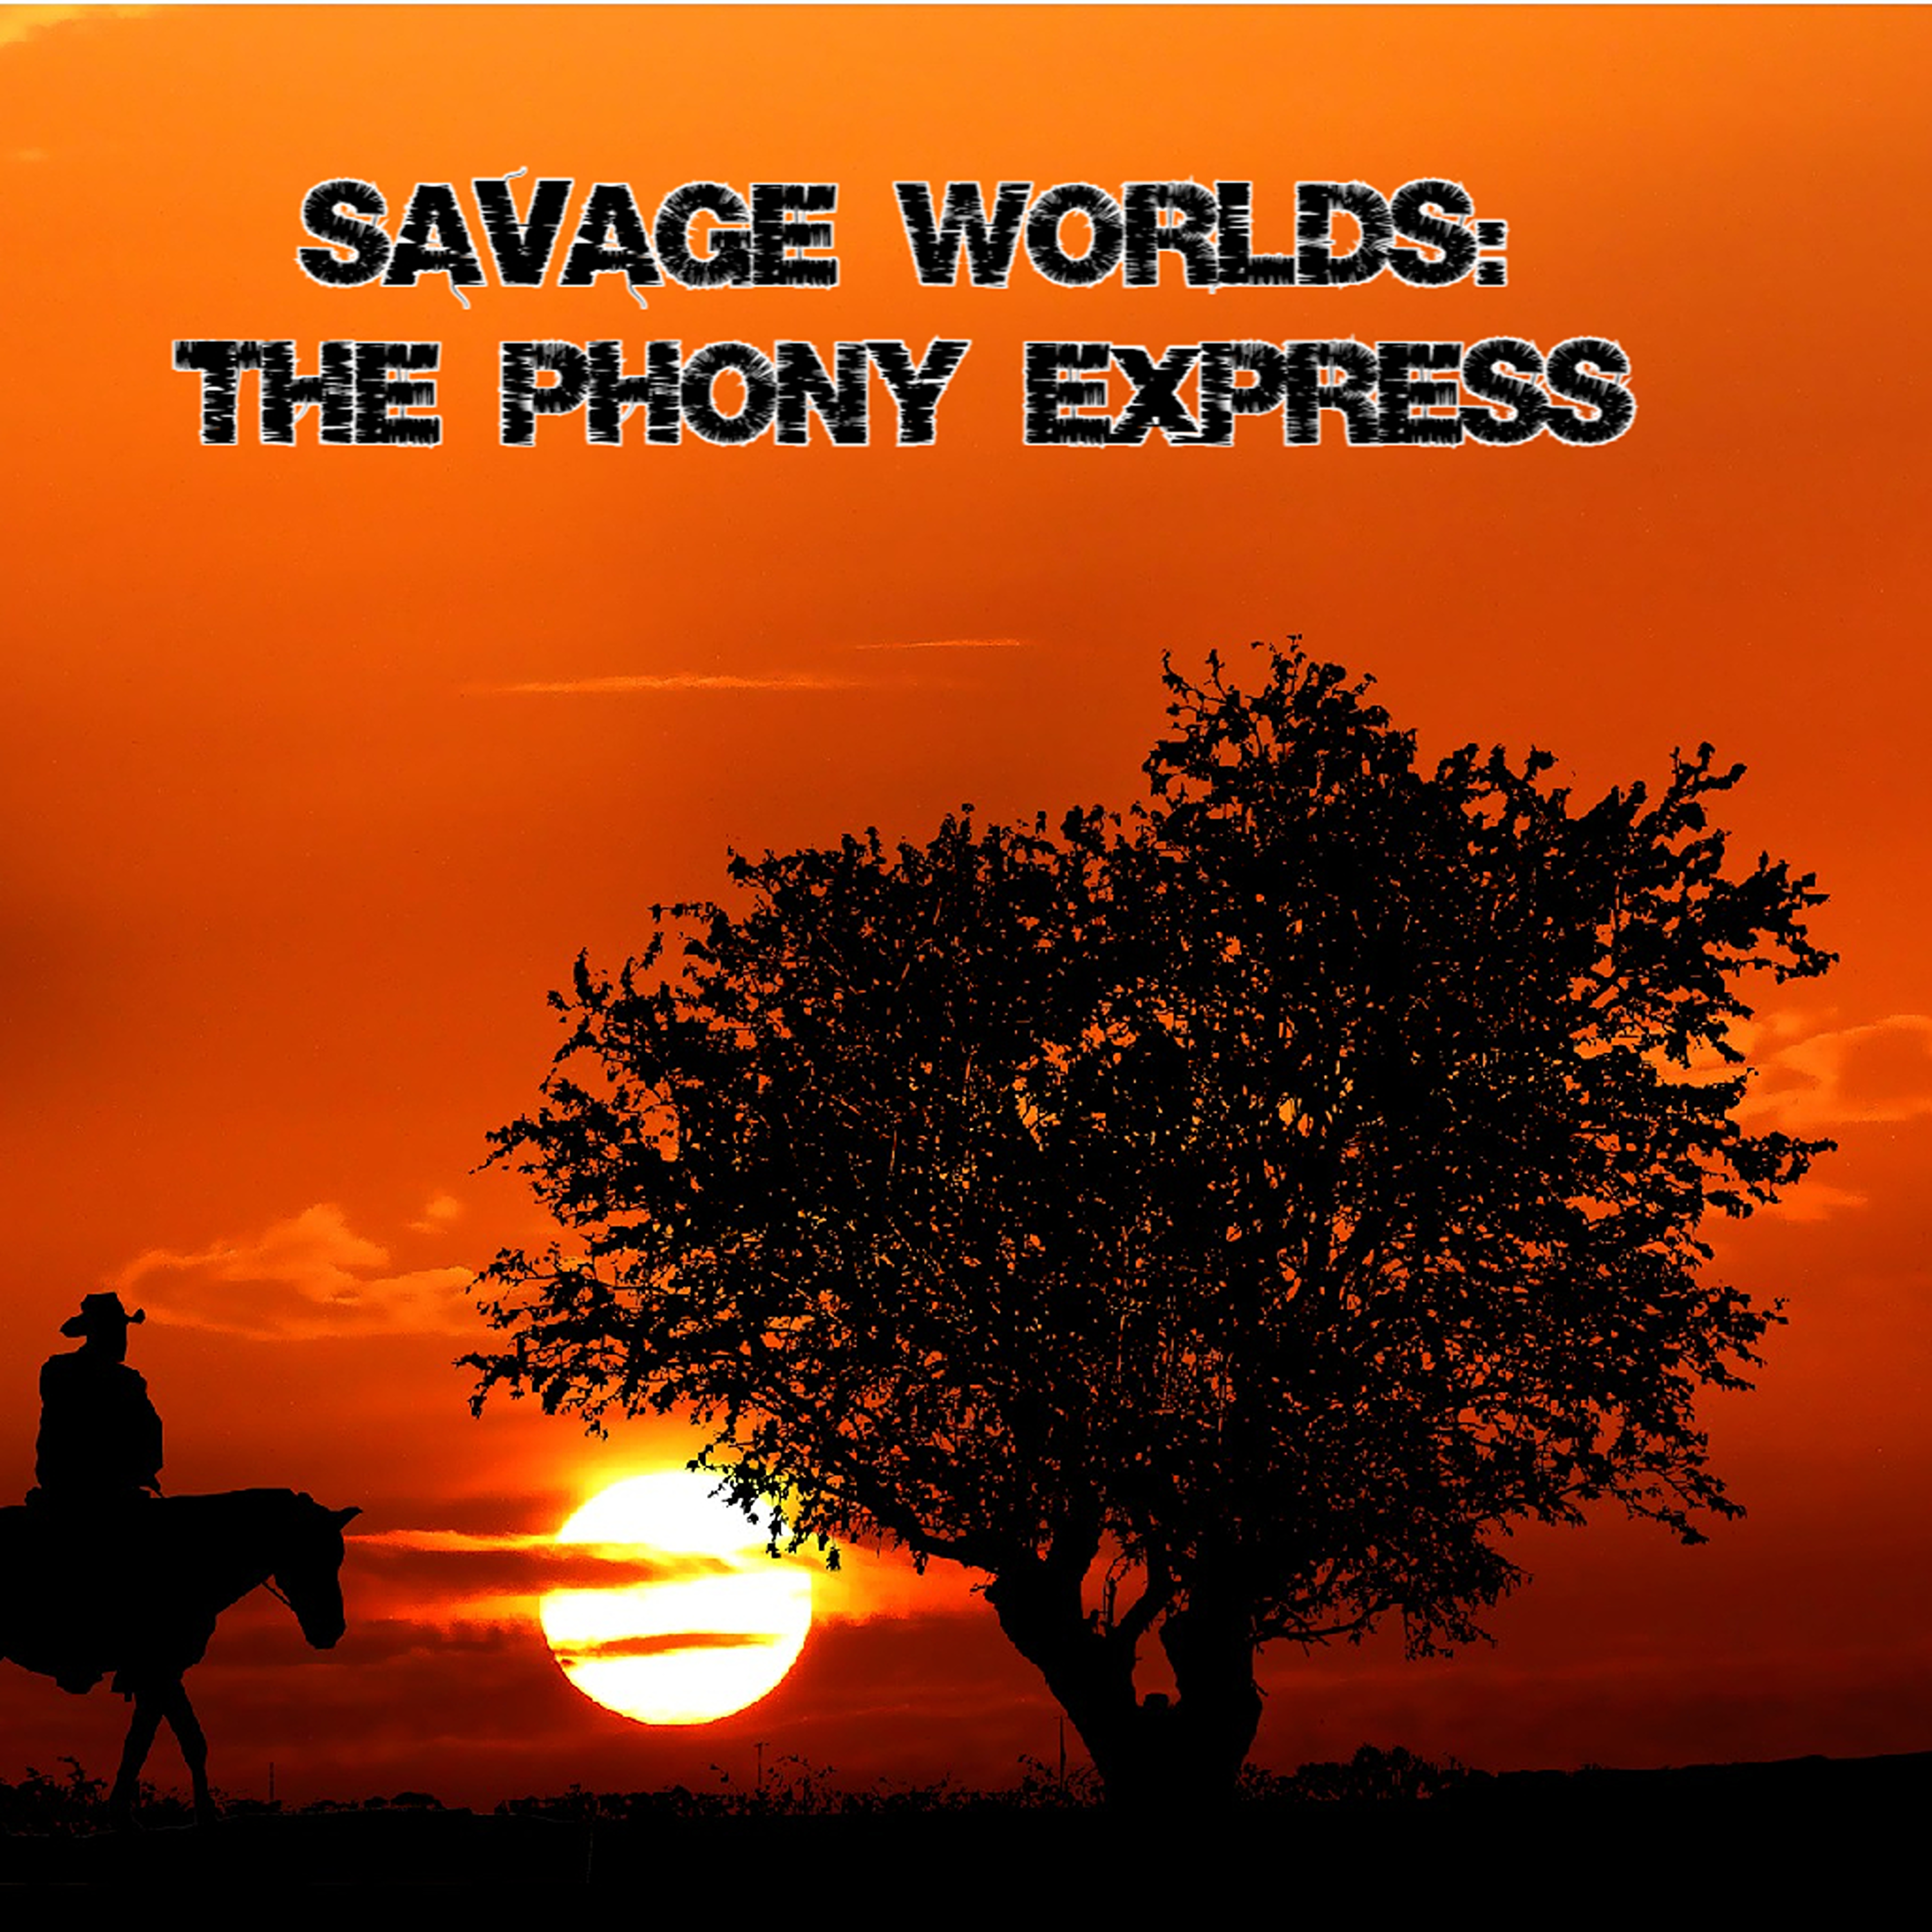 Savage Worlds - The Phony Express 3.1: I'll Take Everything From You!